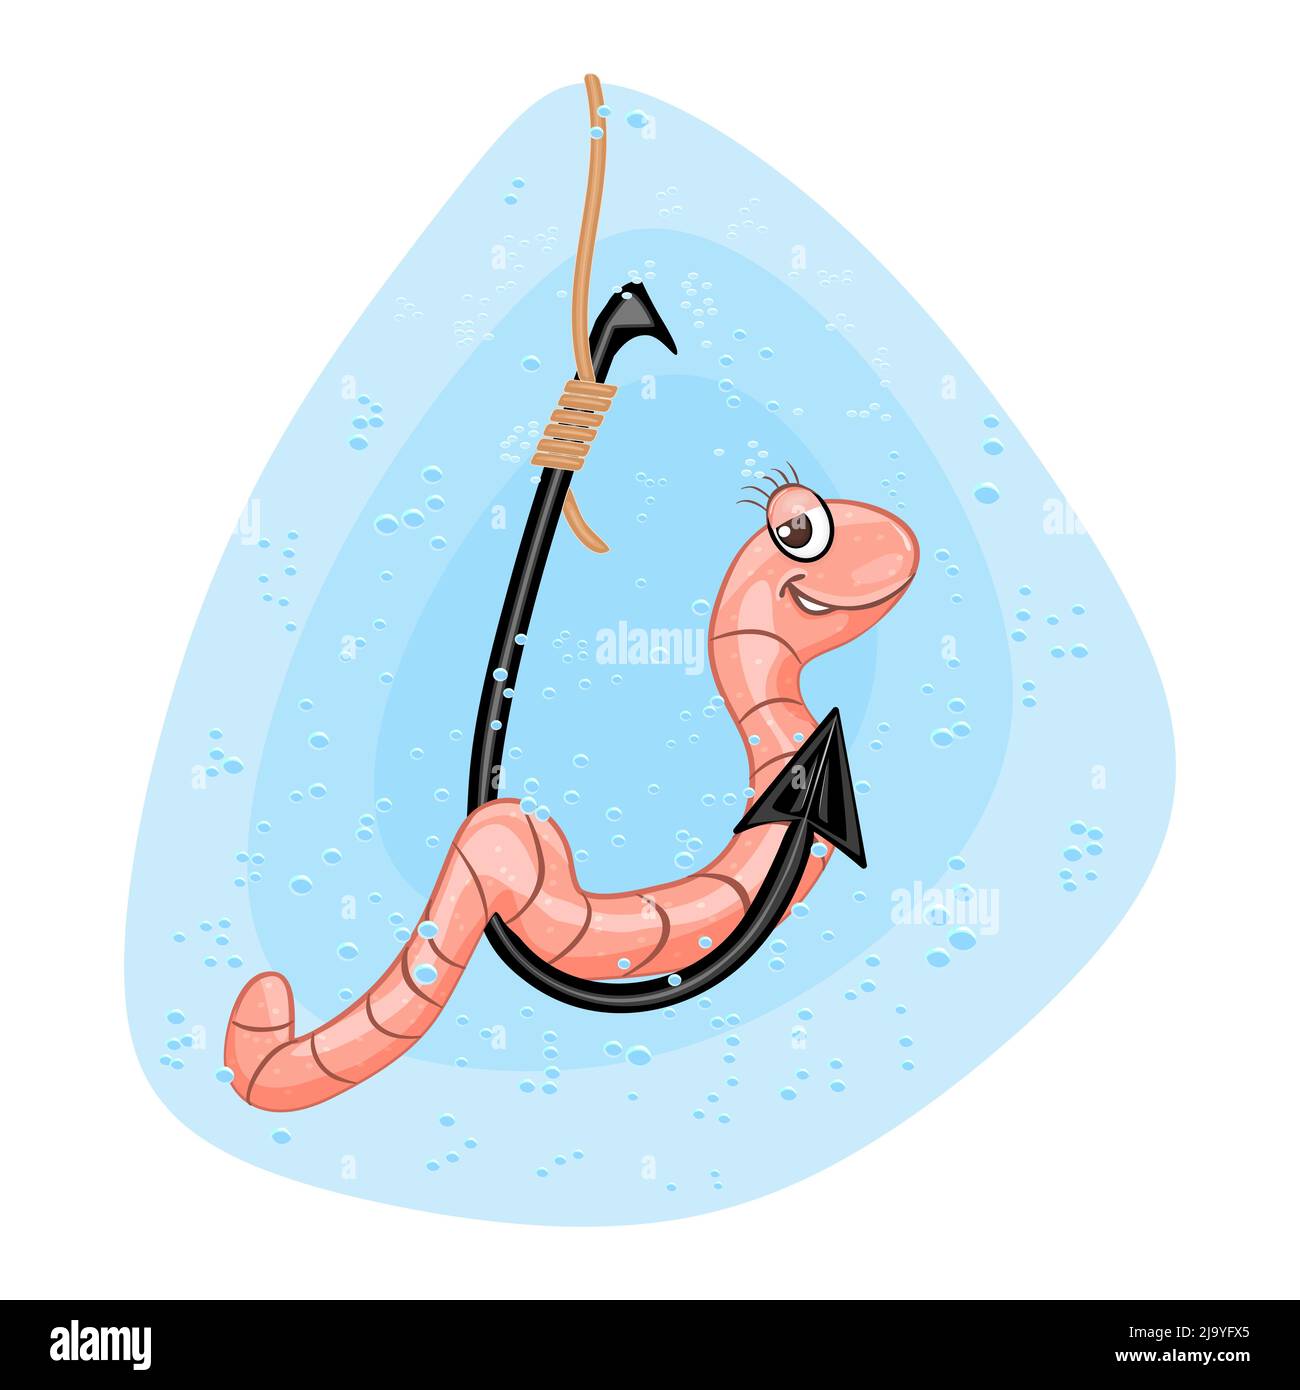 Earthworm on hook. Cartoon earthworm, fishhook, water and bubbles. Fishing bait concept. Funny cute worm hanging from fishing hook.Vector illustration Stock Vector